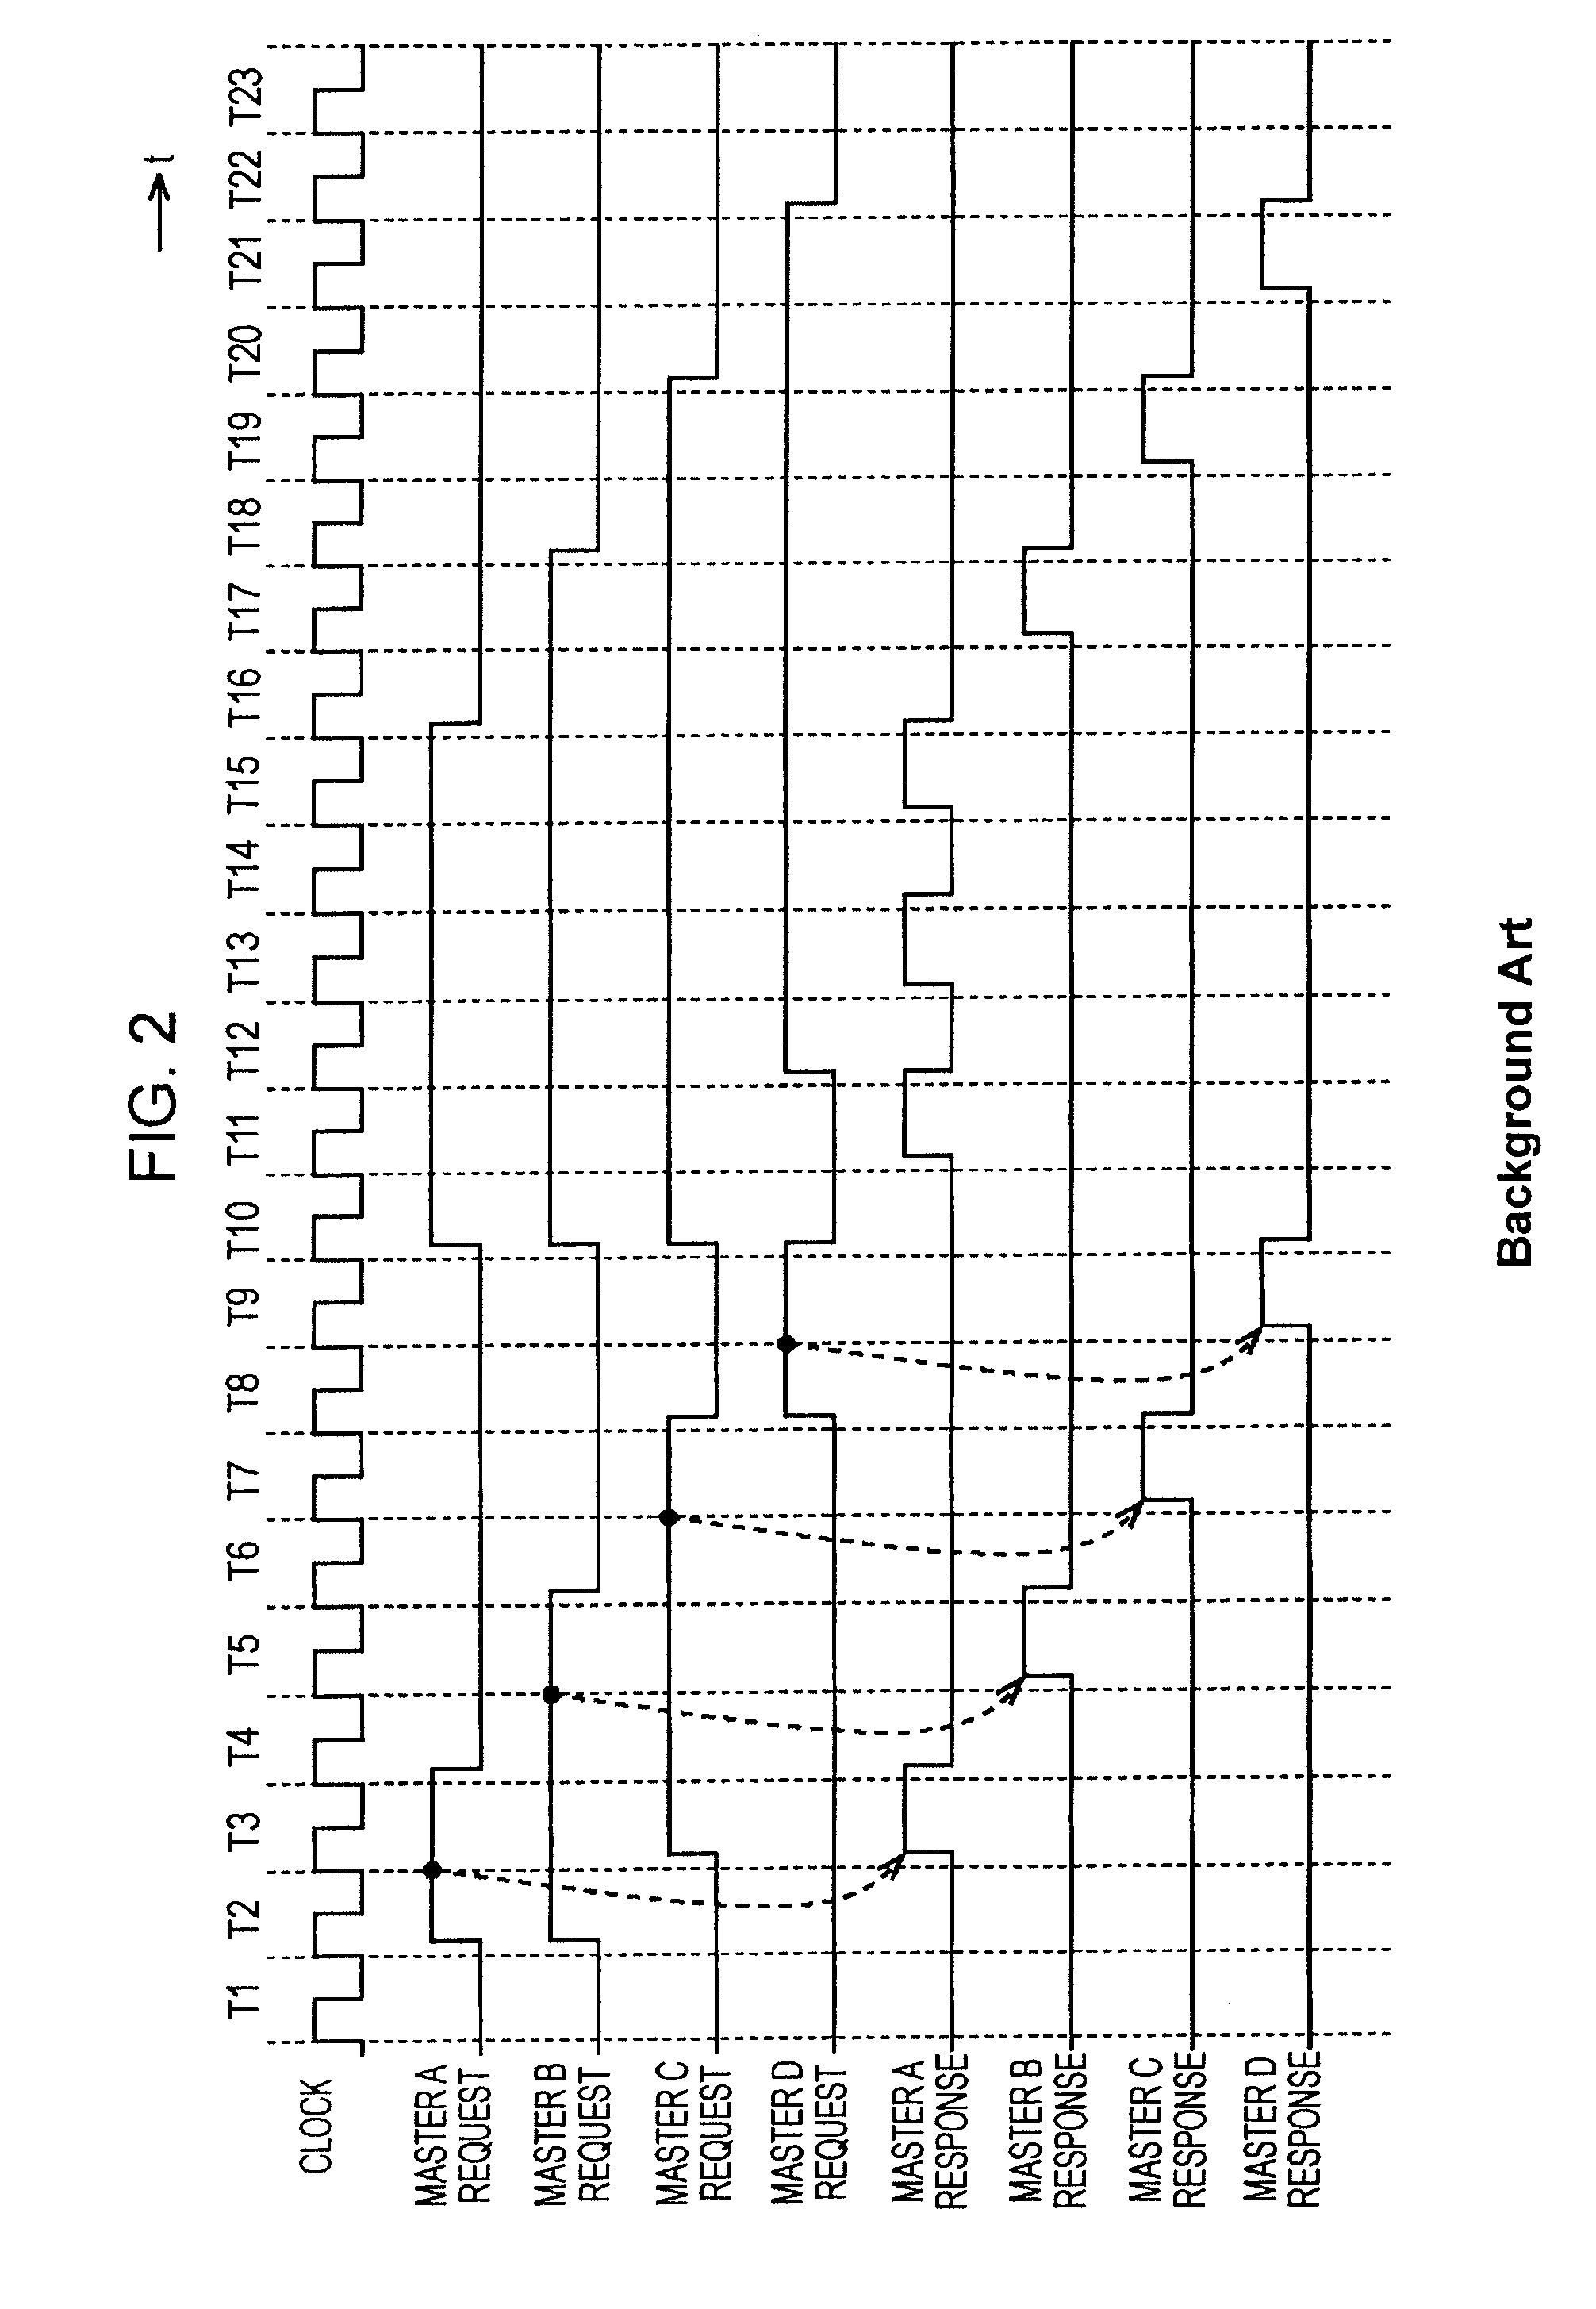 Arbitration apparatus, method, and computer readable medium with dynamically adjustable priority scheme